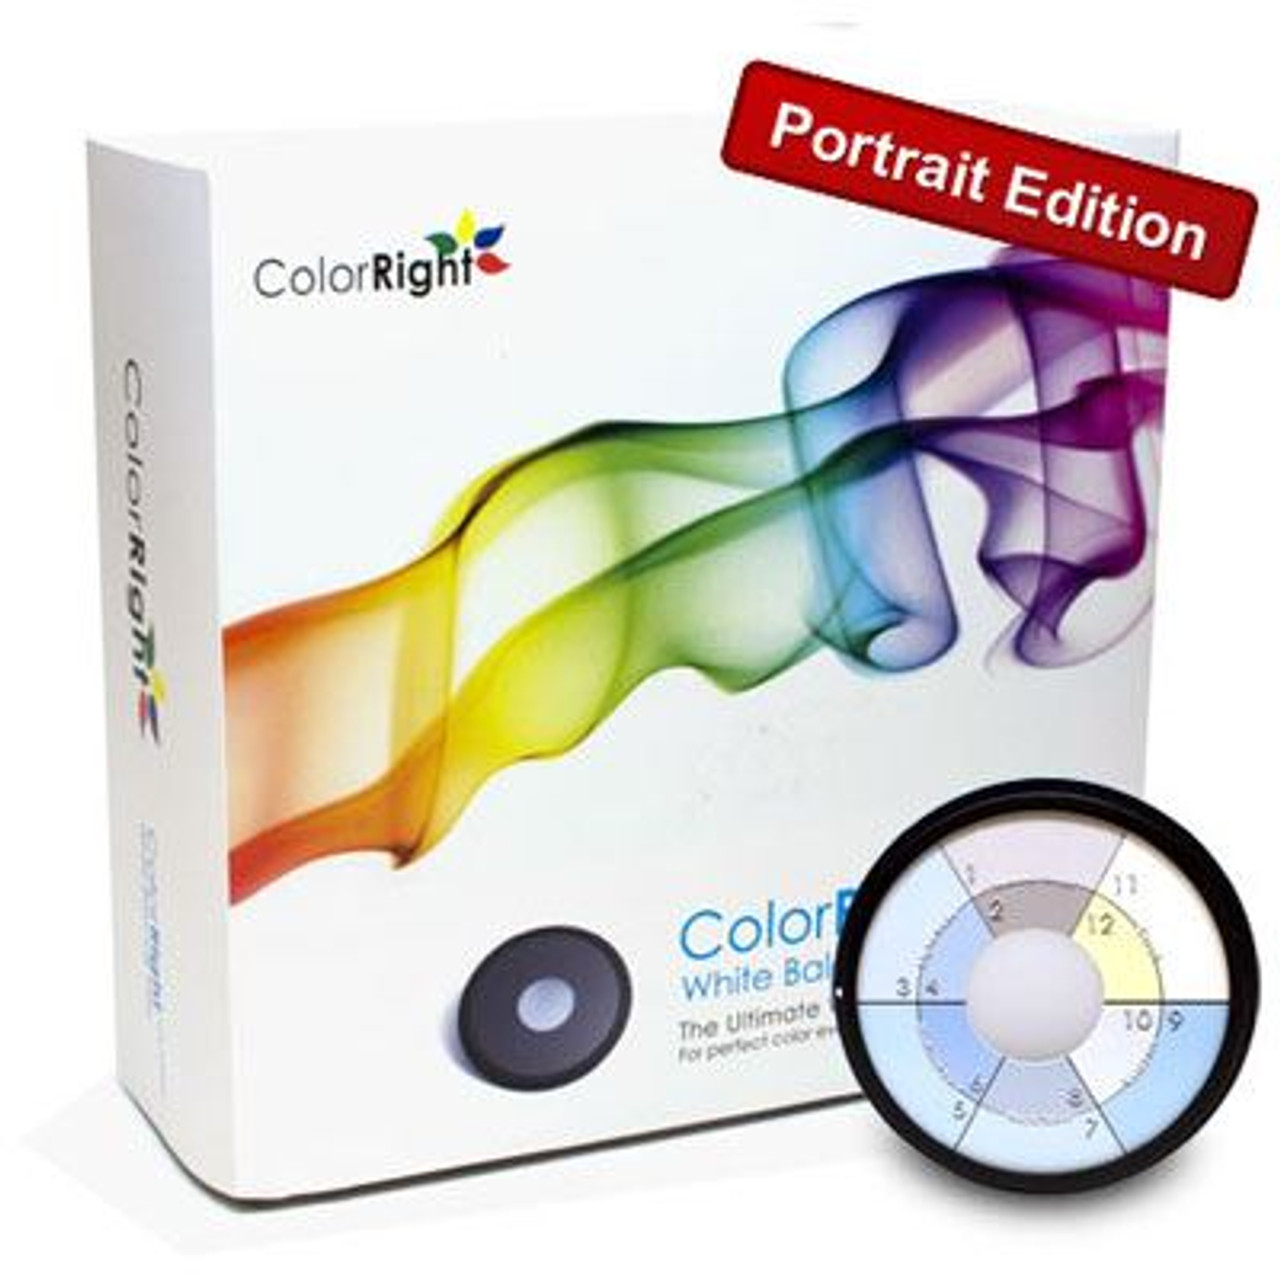 ColorRight Classic White Balance Filter Tool